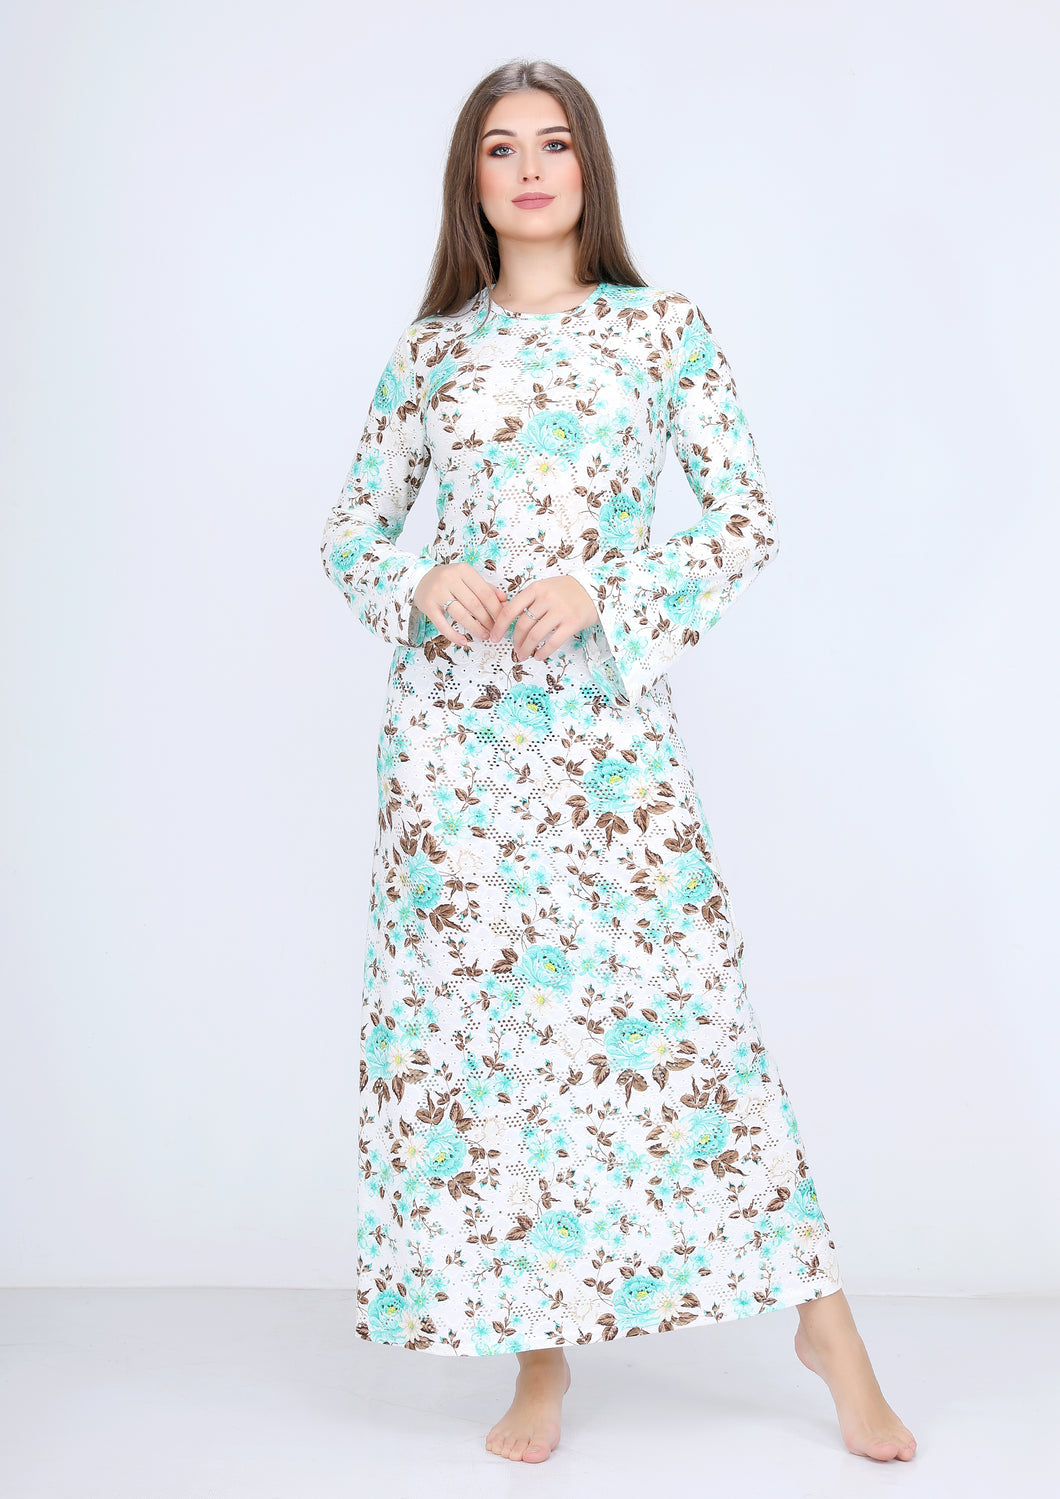 Long turquoise floral dress